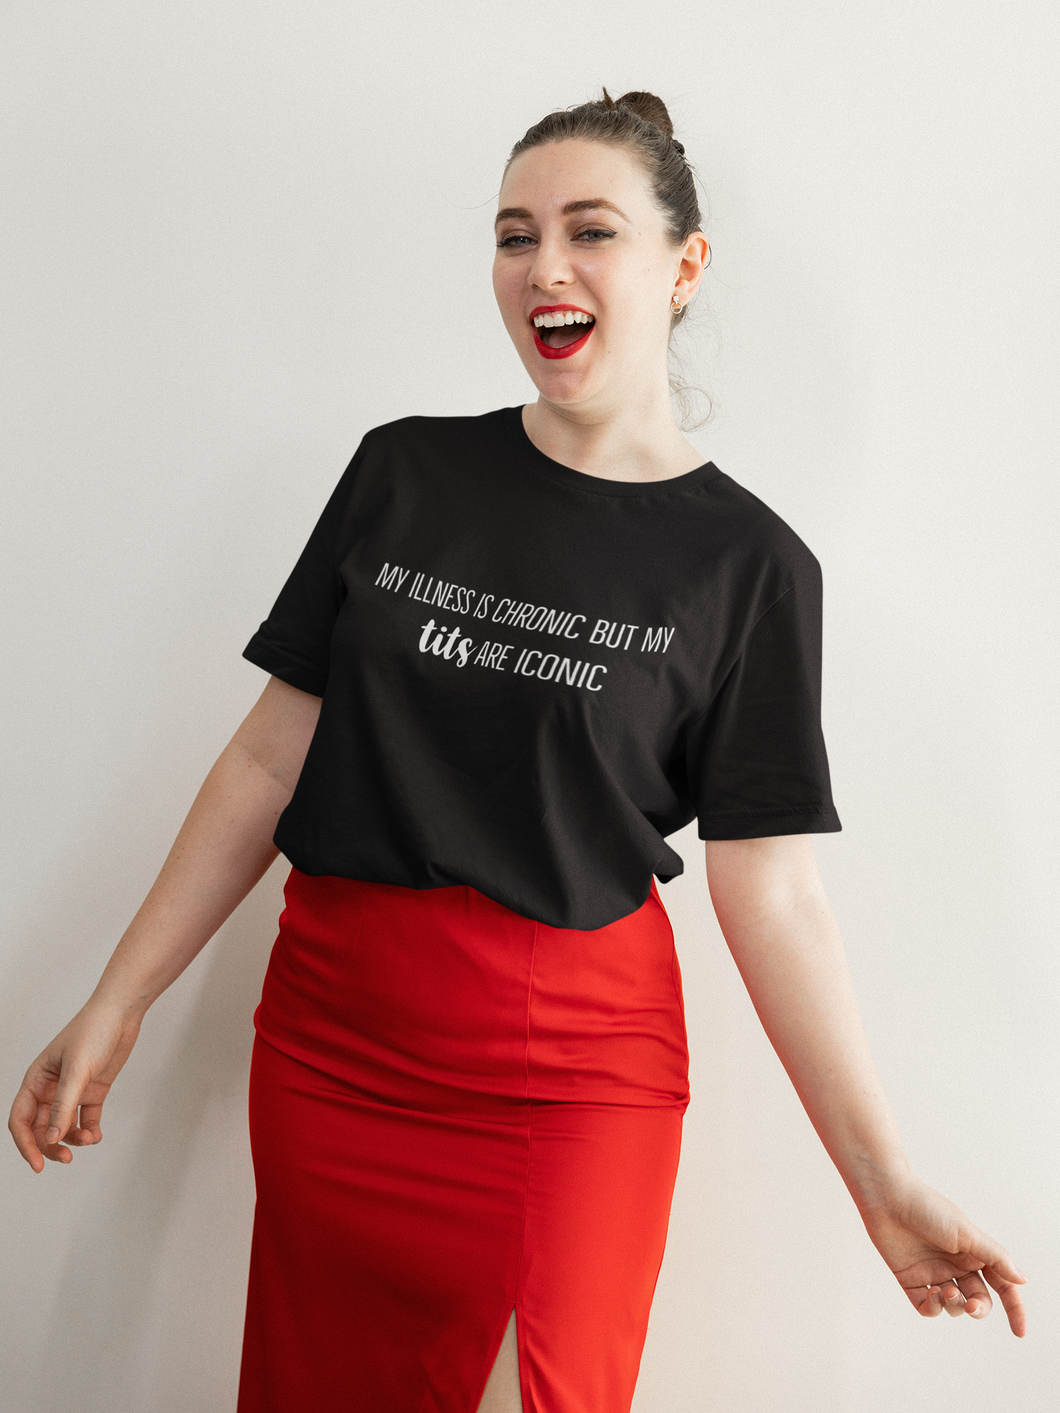 My illness is chronic but my tits are iconic - Unisex Tee